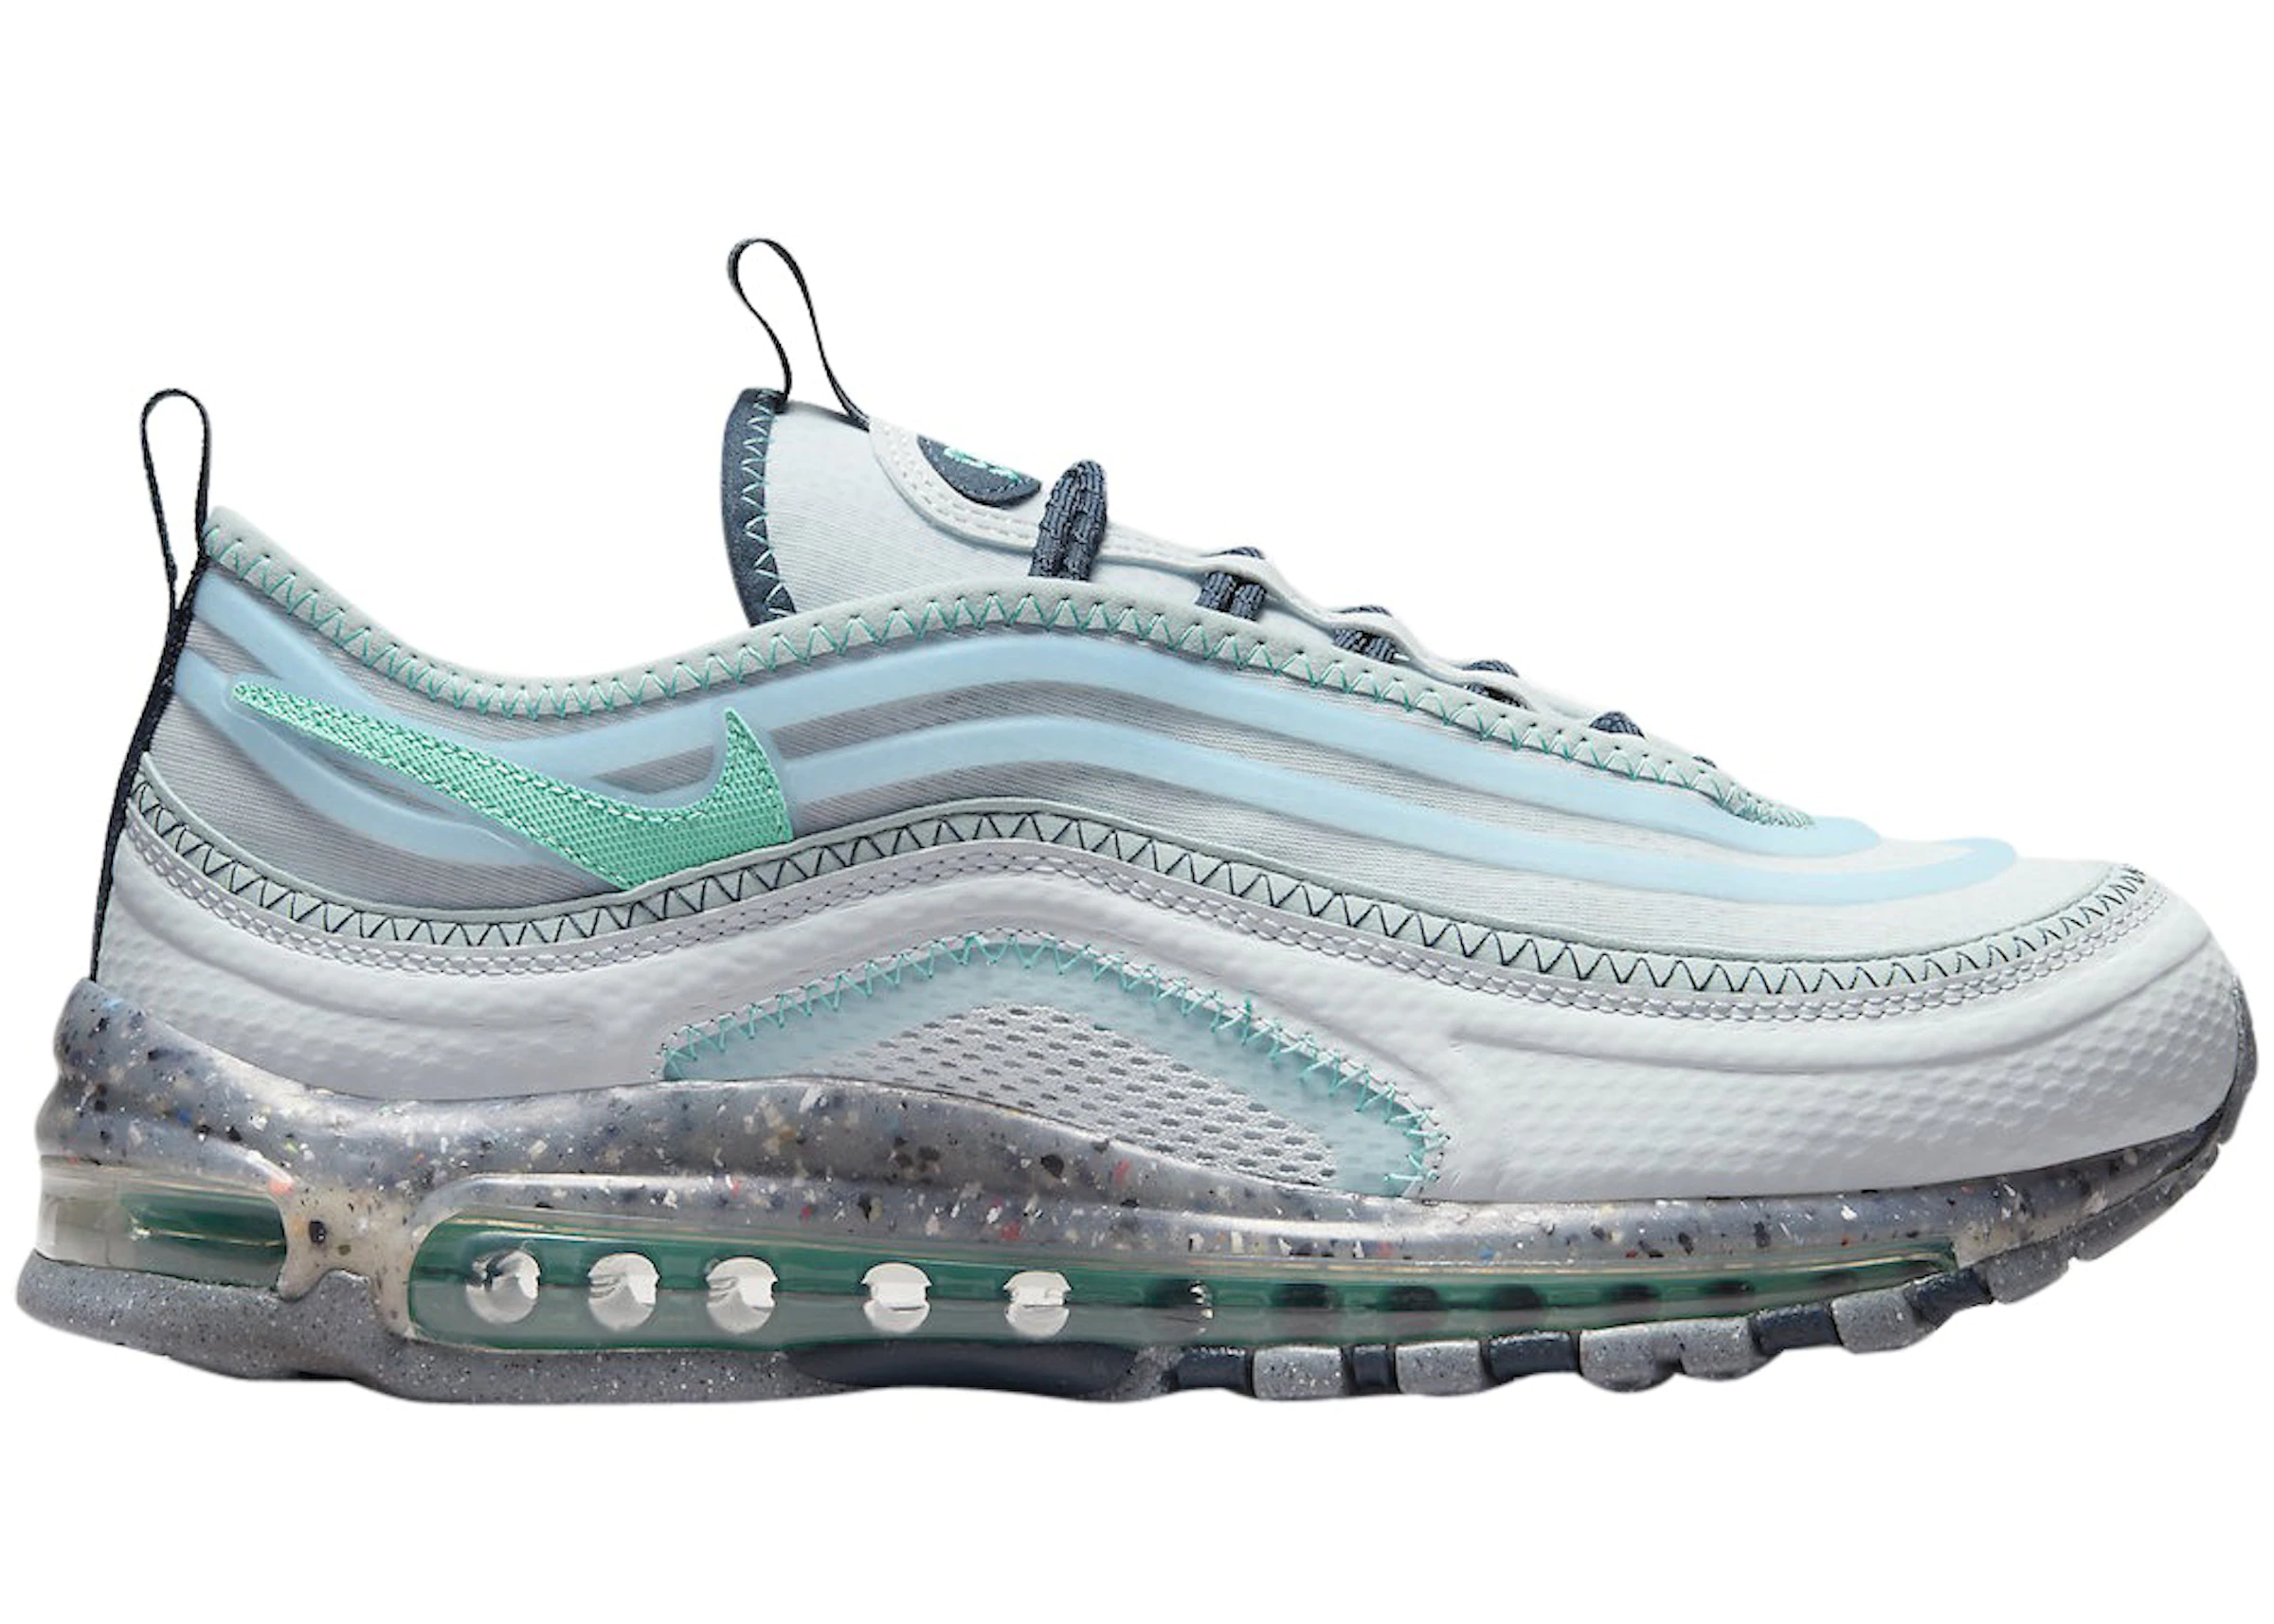 Microbe gas dictionary Nike Air Max 97 Sneakers - StockX